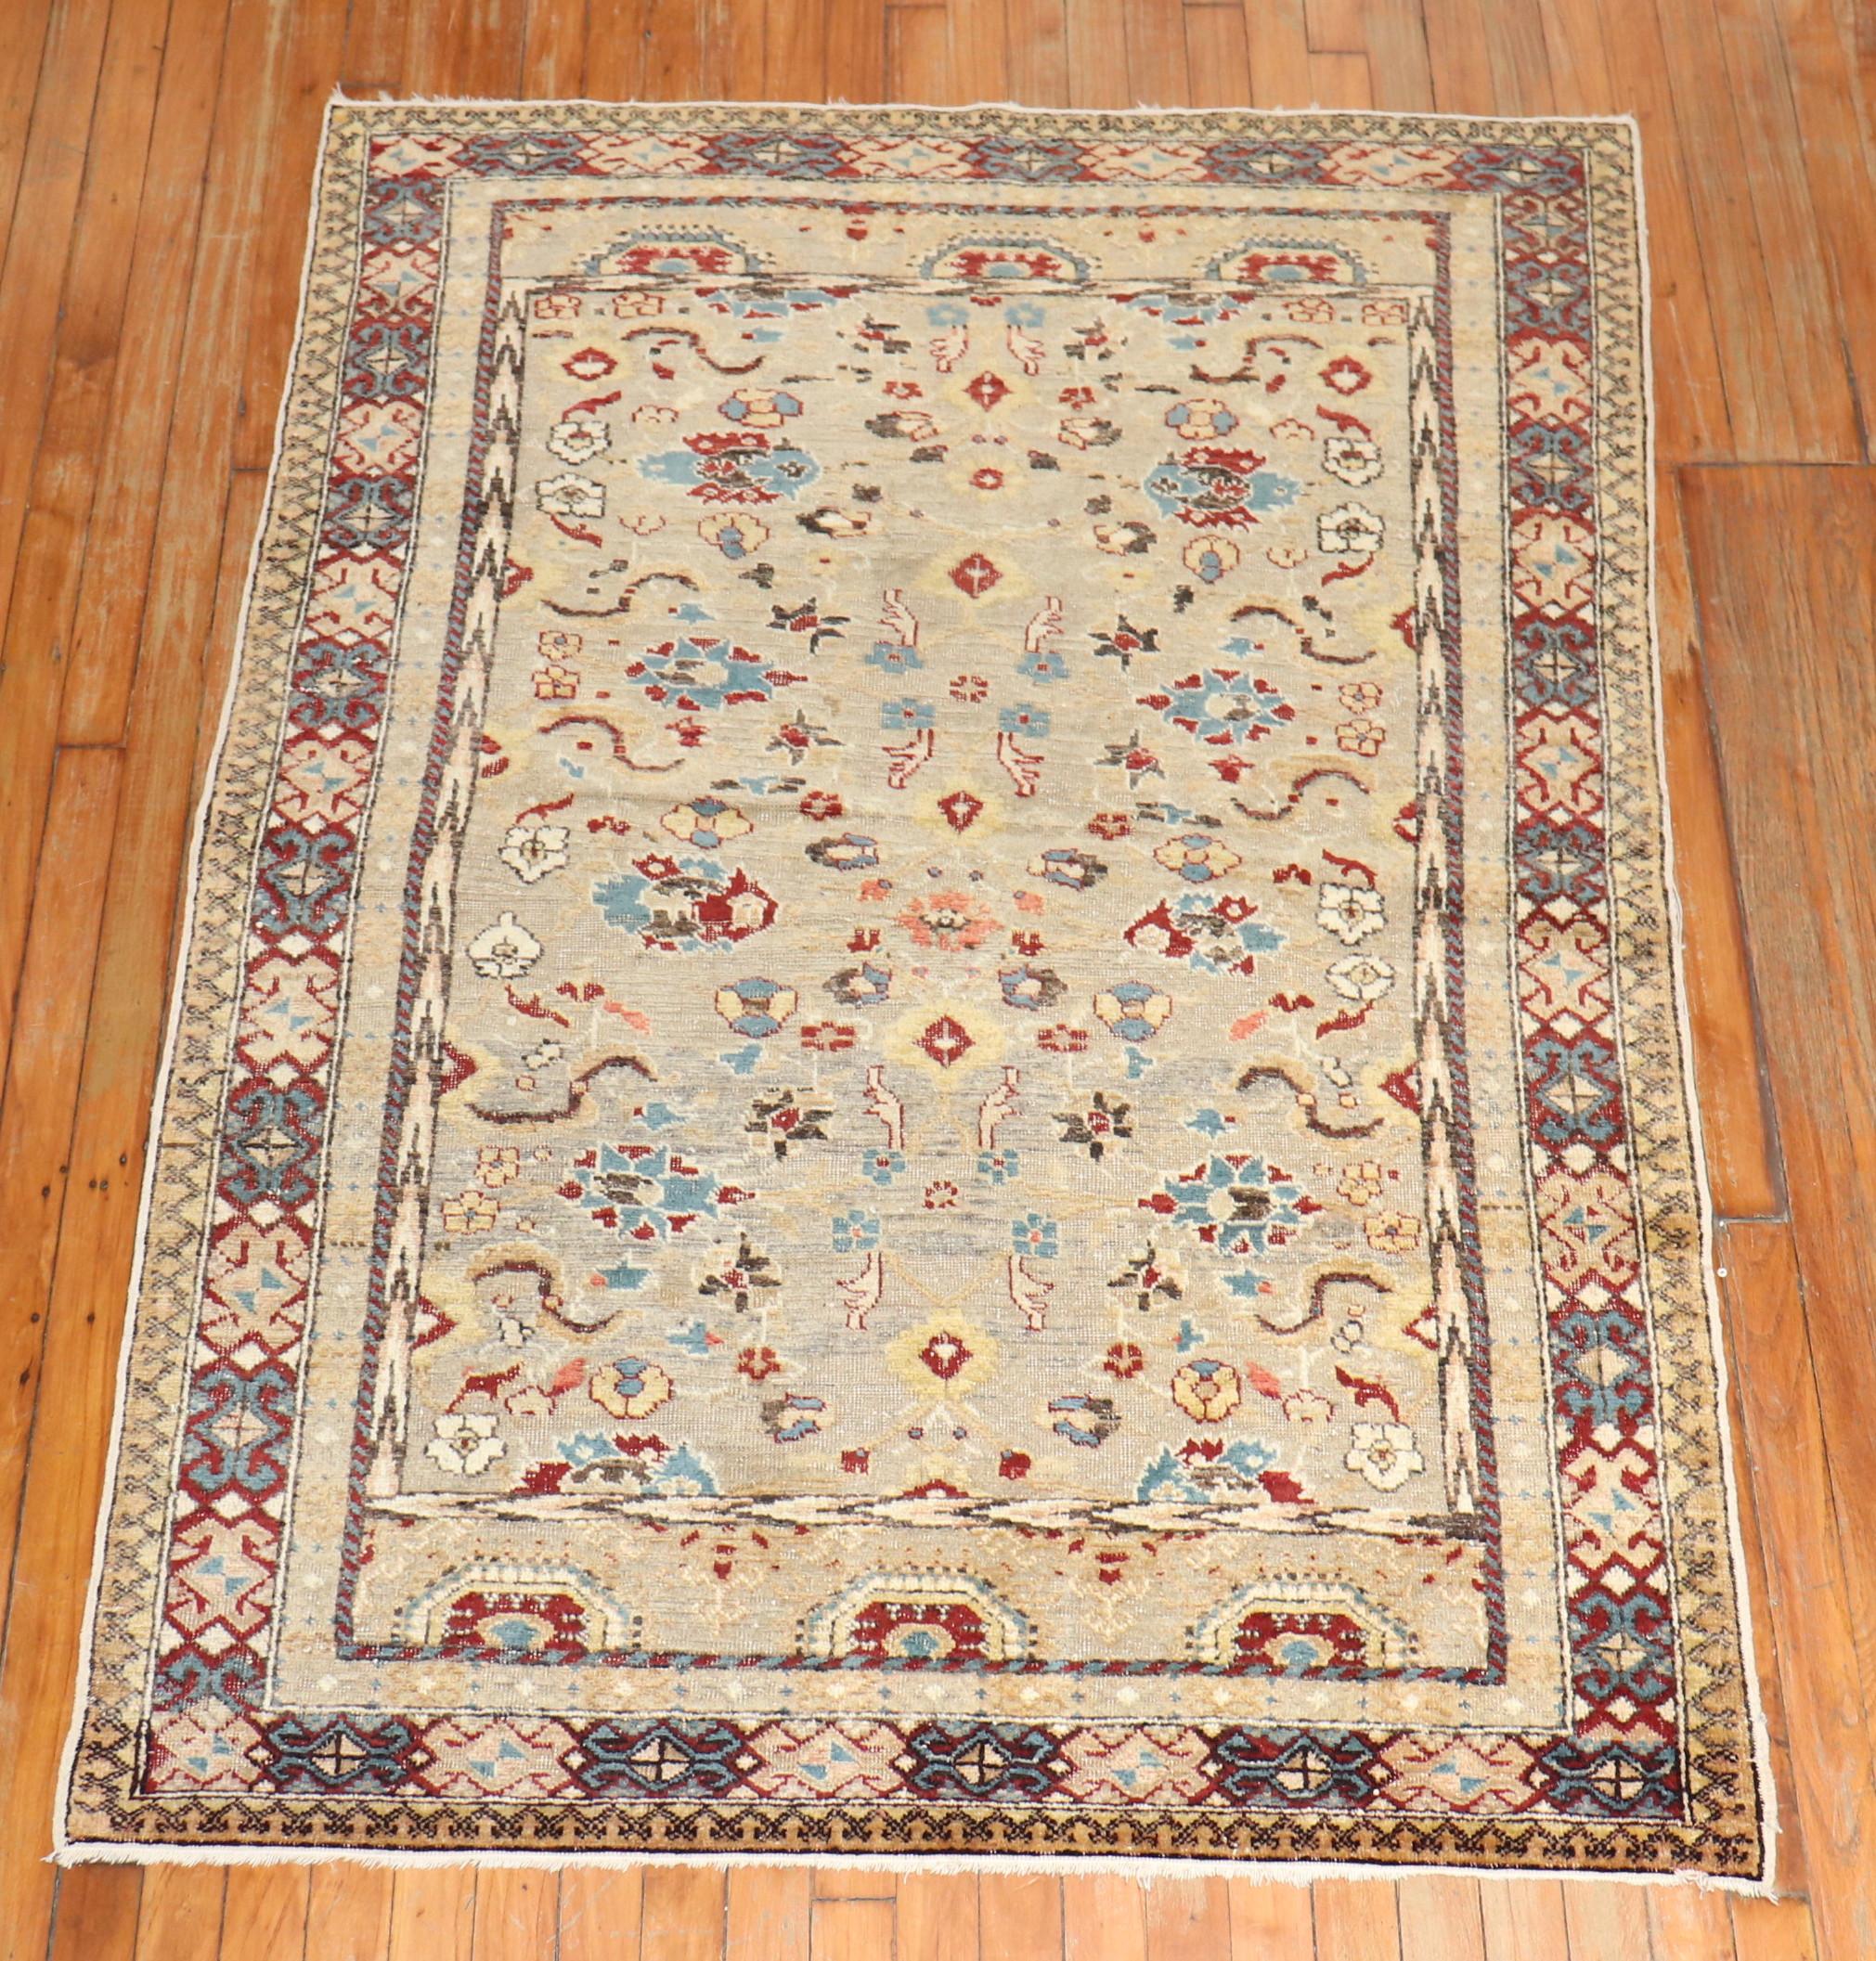 A decorative early 20th century Turkish Sivas rug.

Measures: 4' x 5'7''.